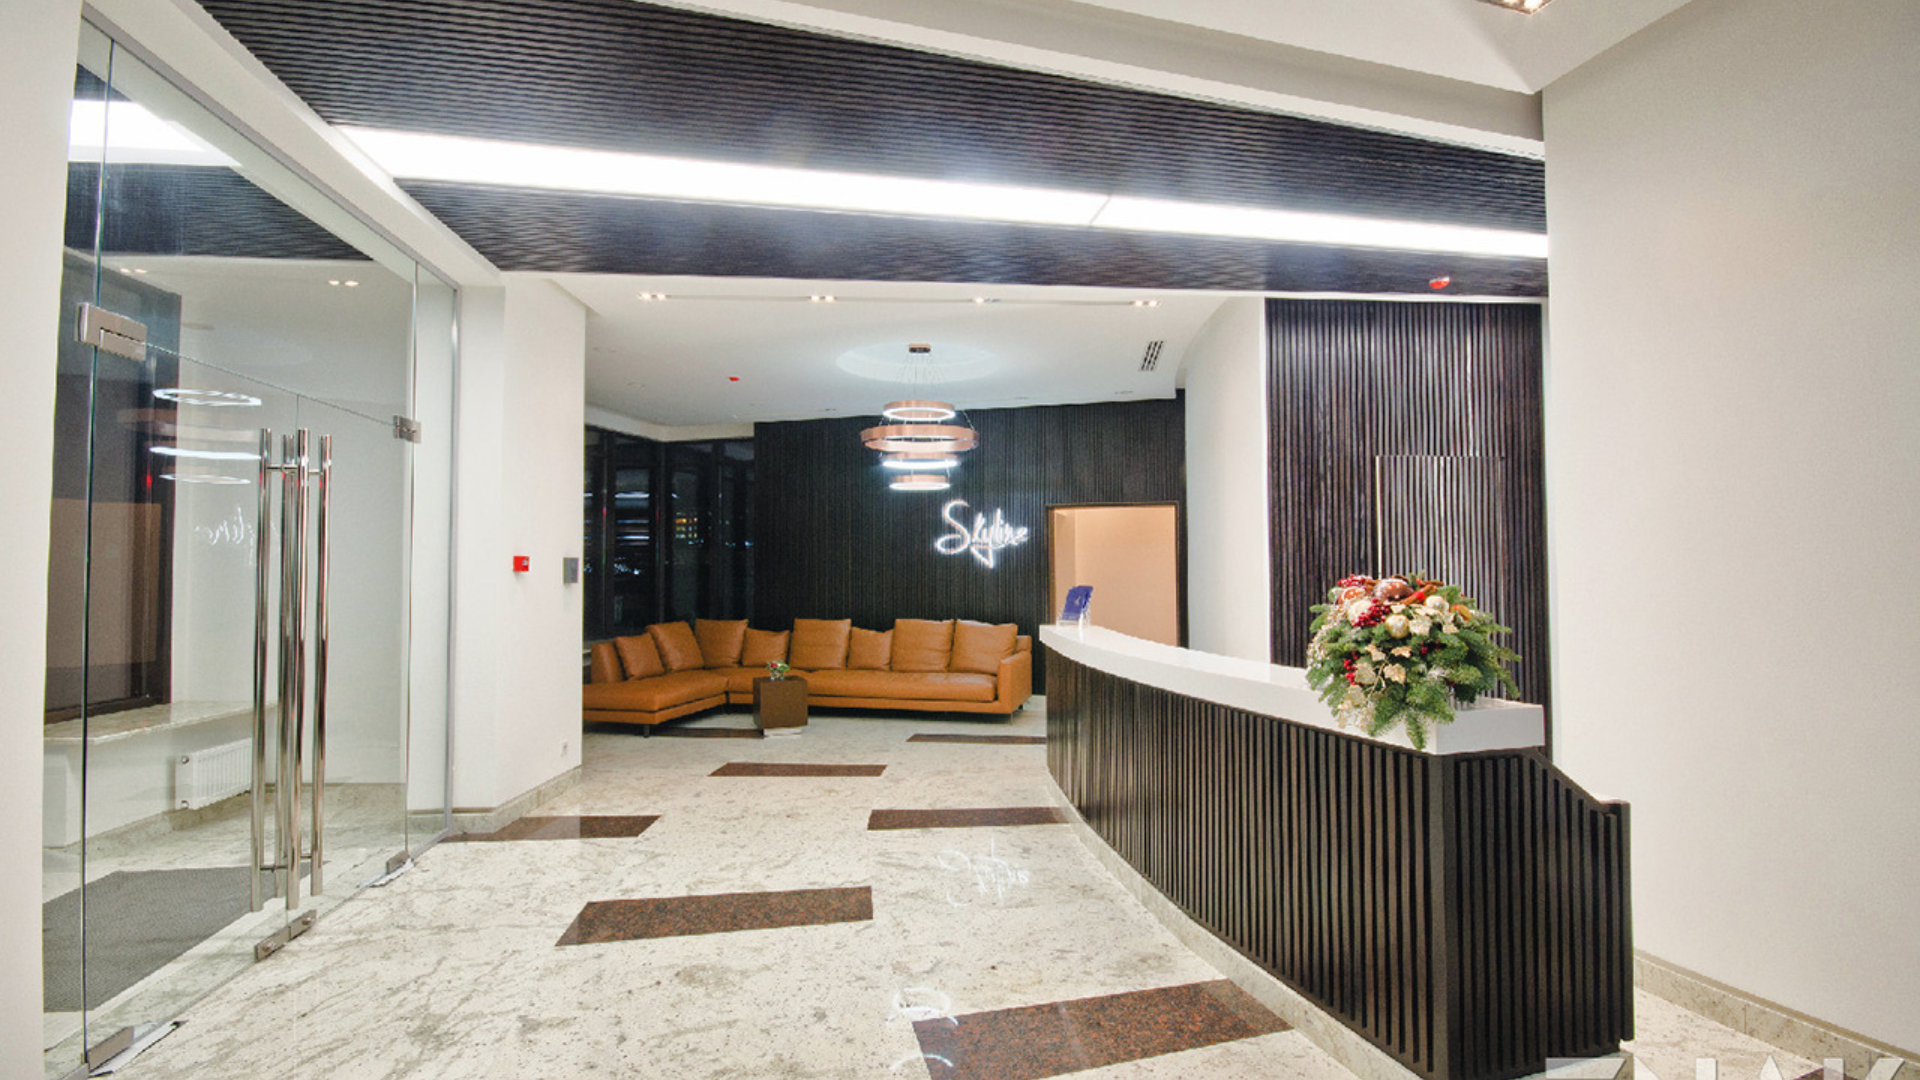 Sales office of Skyline residential complex